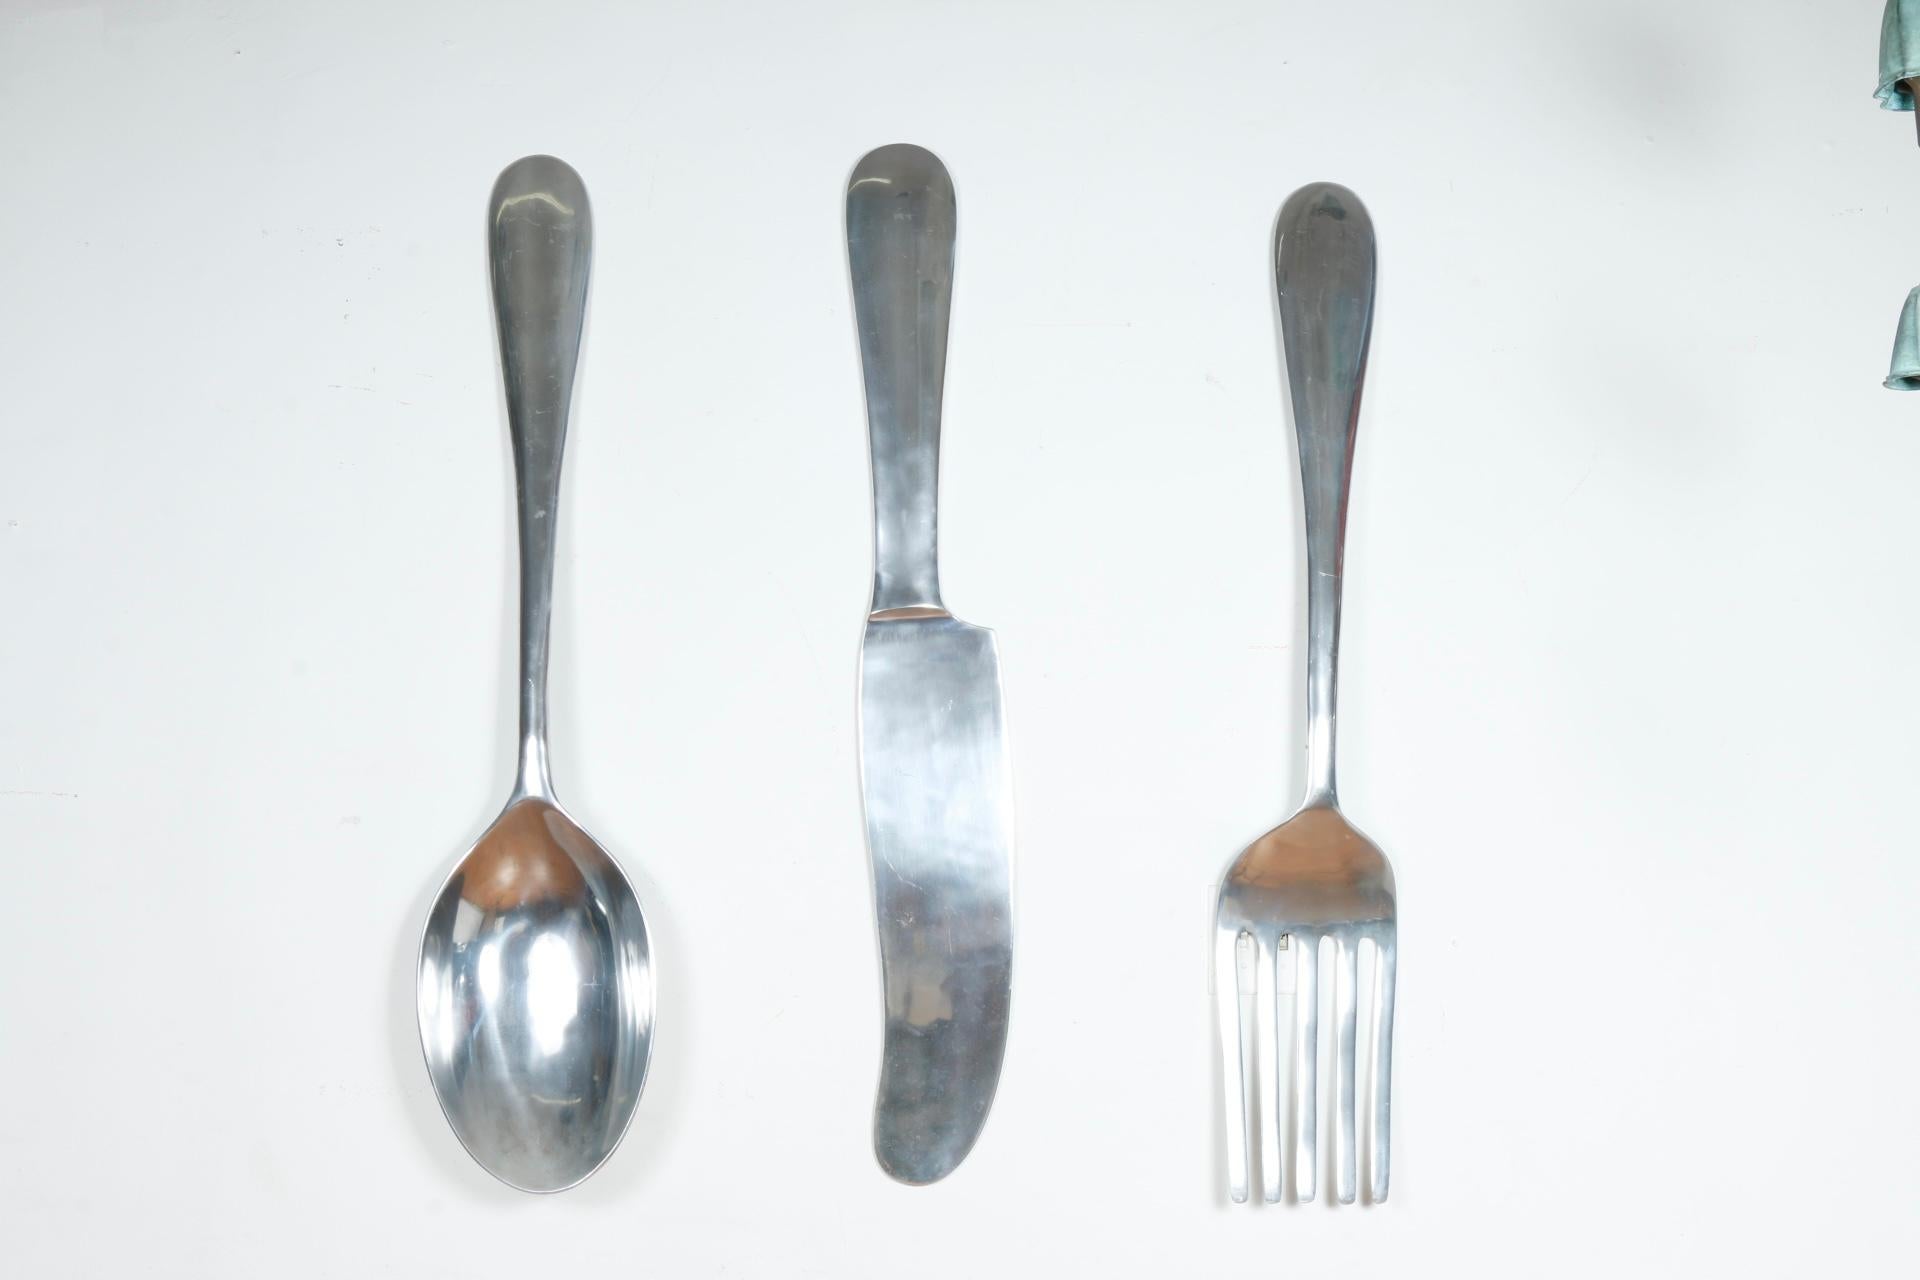 Vintage aluminum set of 3 knife, fork and spoon large wall decor. Has a hook in the top back so they can hang. Well kept with signs of age and use.